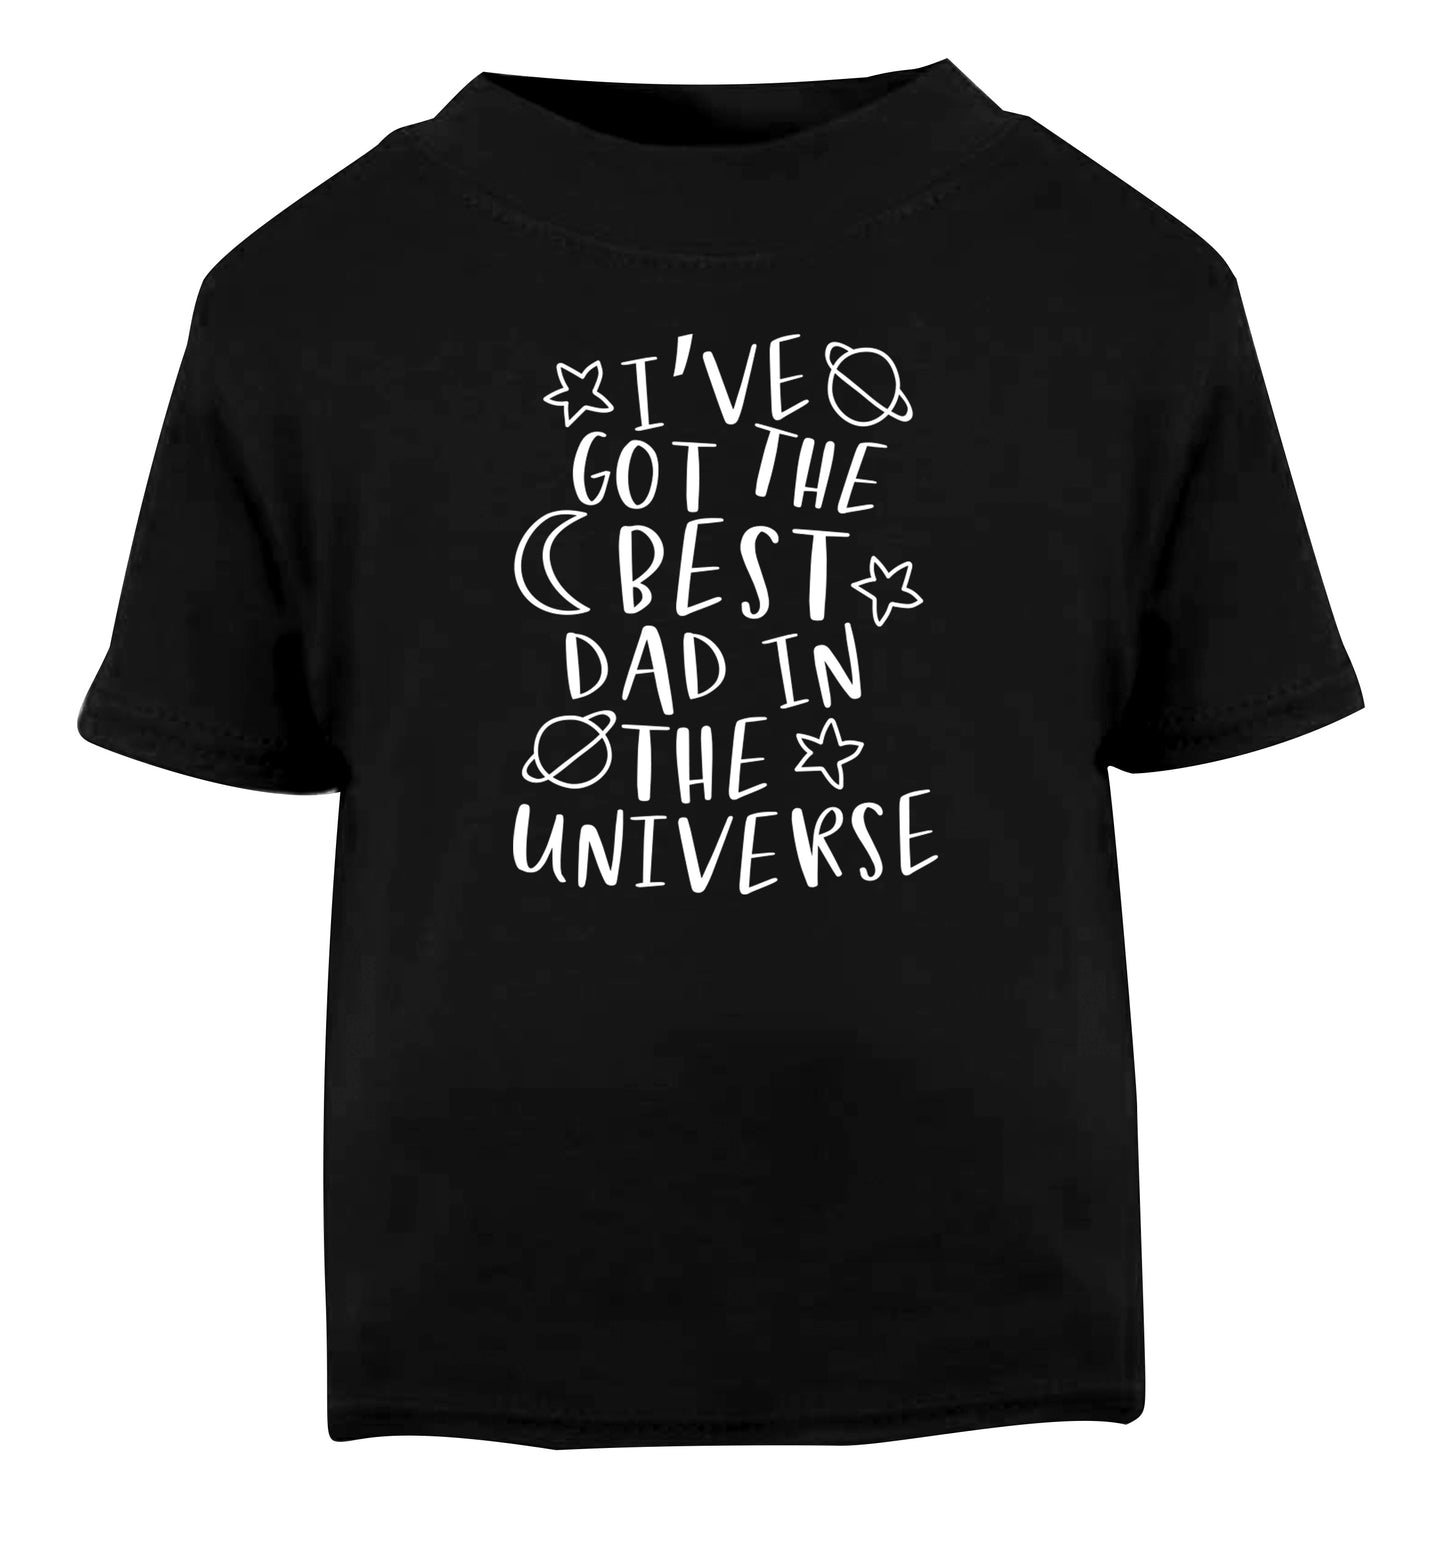 I've got the best dad in the universe Black Baby Toddler Tshirt 2 years